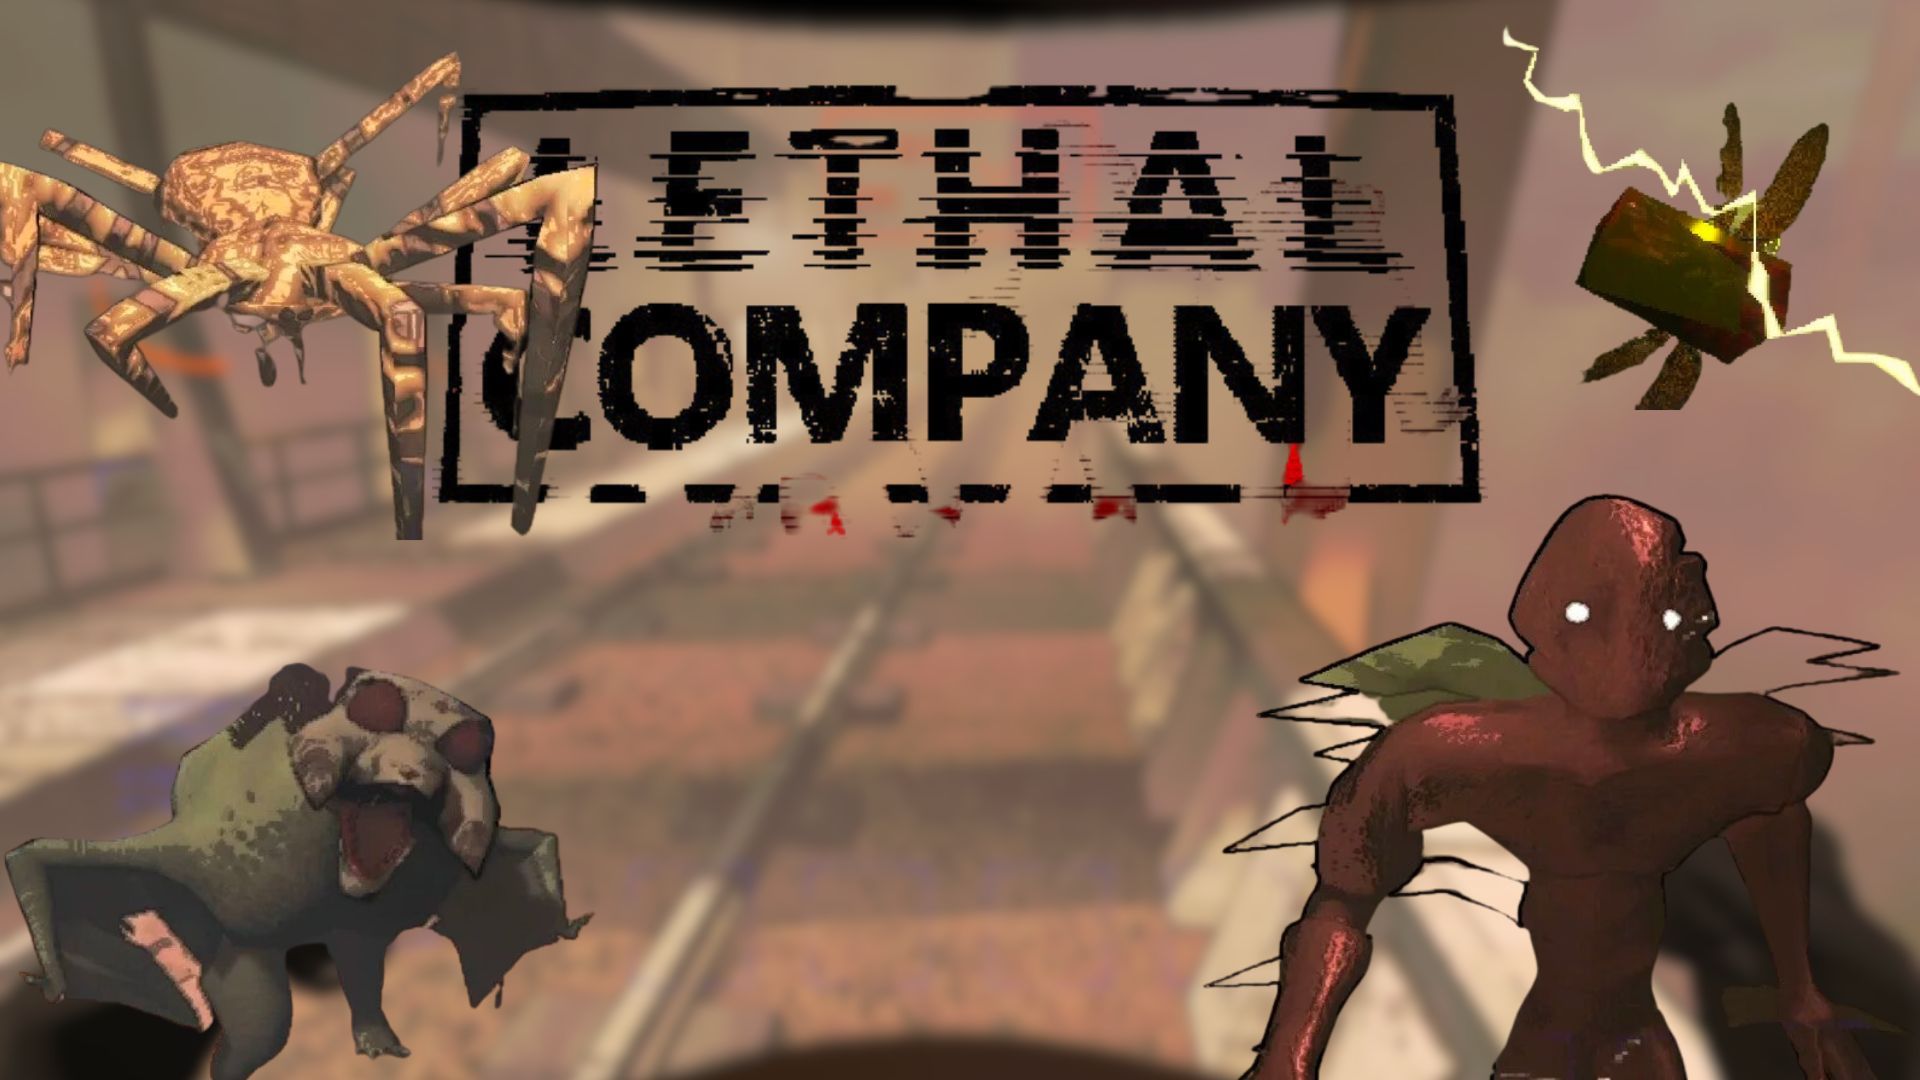 All Monsters in Lethal Company and How to Deal With Them